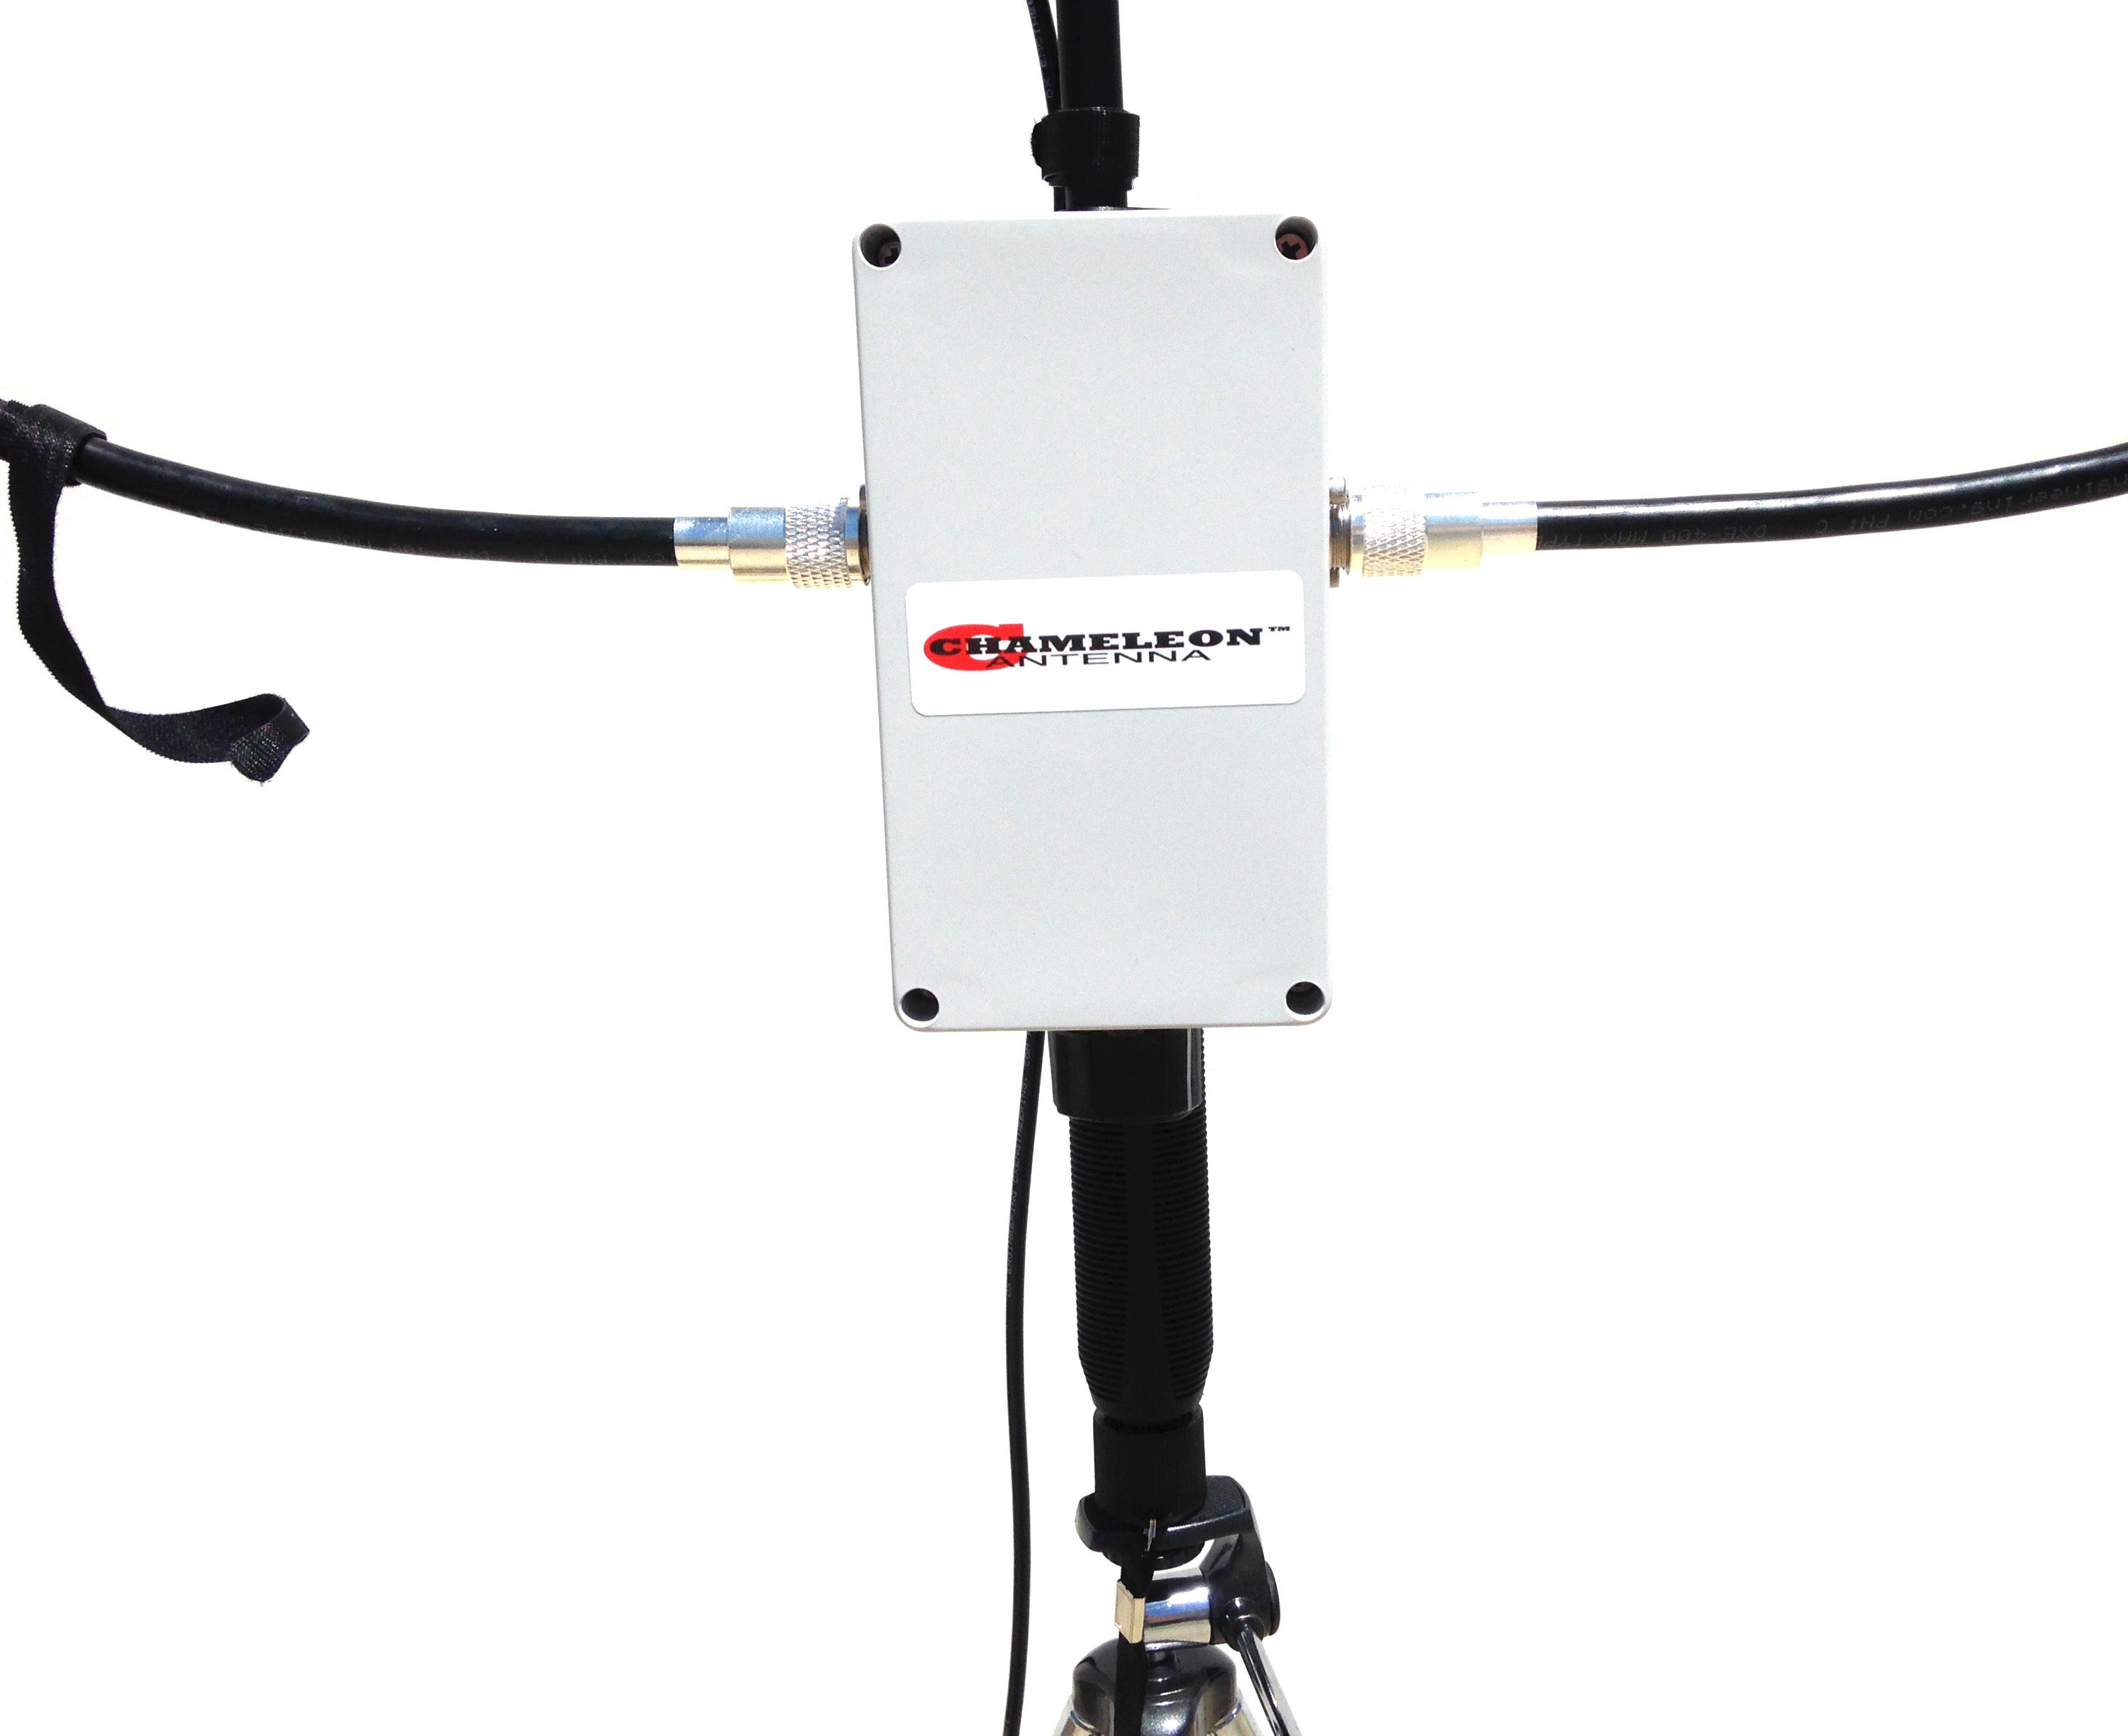 CHA P-LOOP Portable HF Antenna Covering 6.0 MHz to 30.0 MHz 2